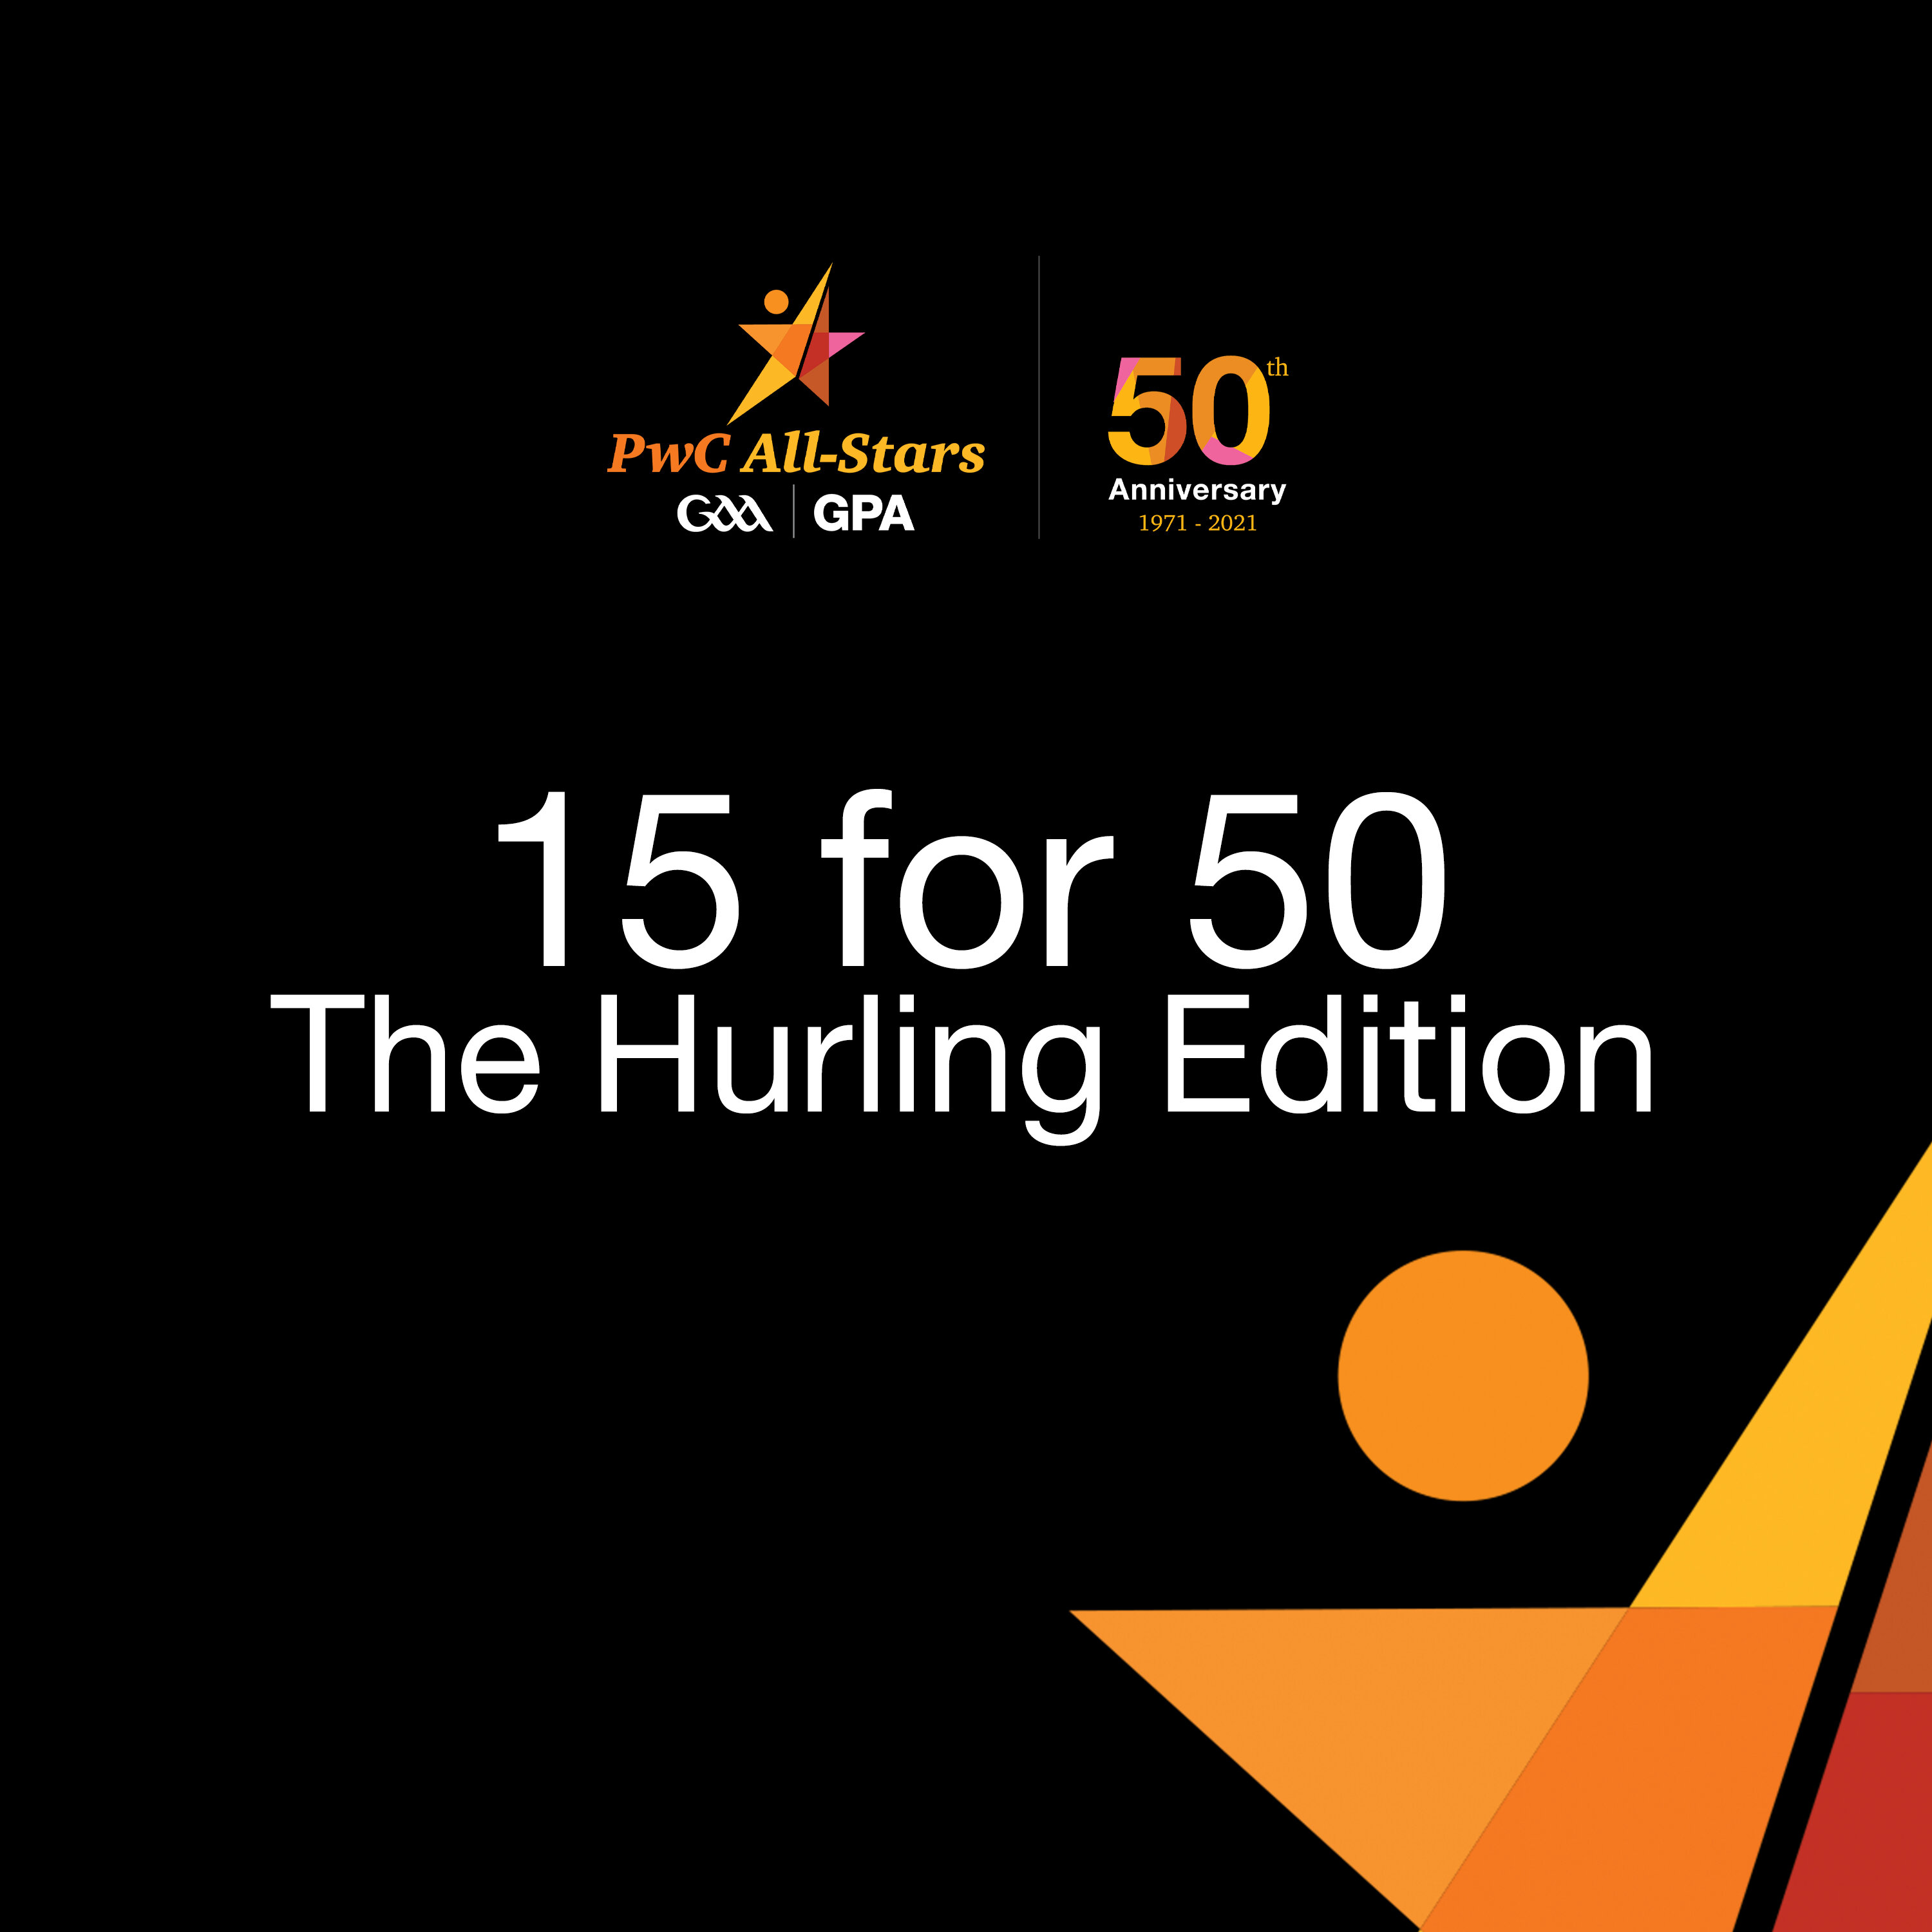 Choosing The Best Hurling XV Of The Past 50 Years With Anthony Daly, Anthony Nash and Liam Sheedy | PwC 15 For 50